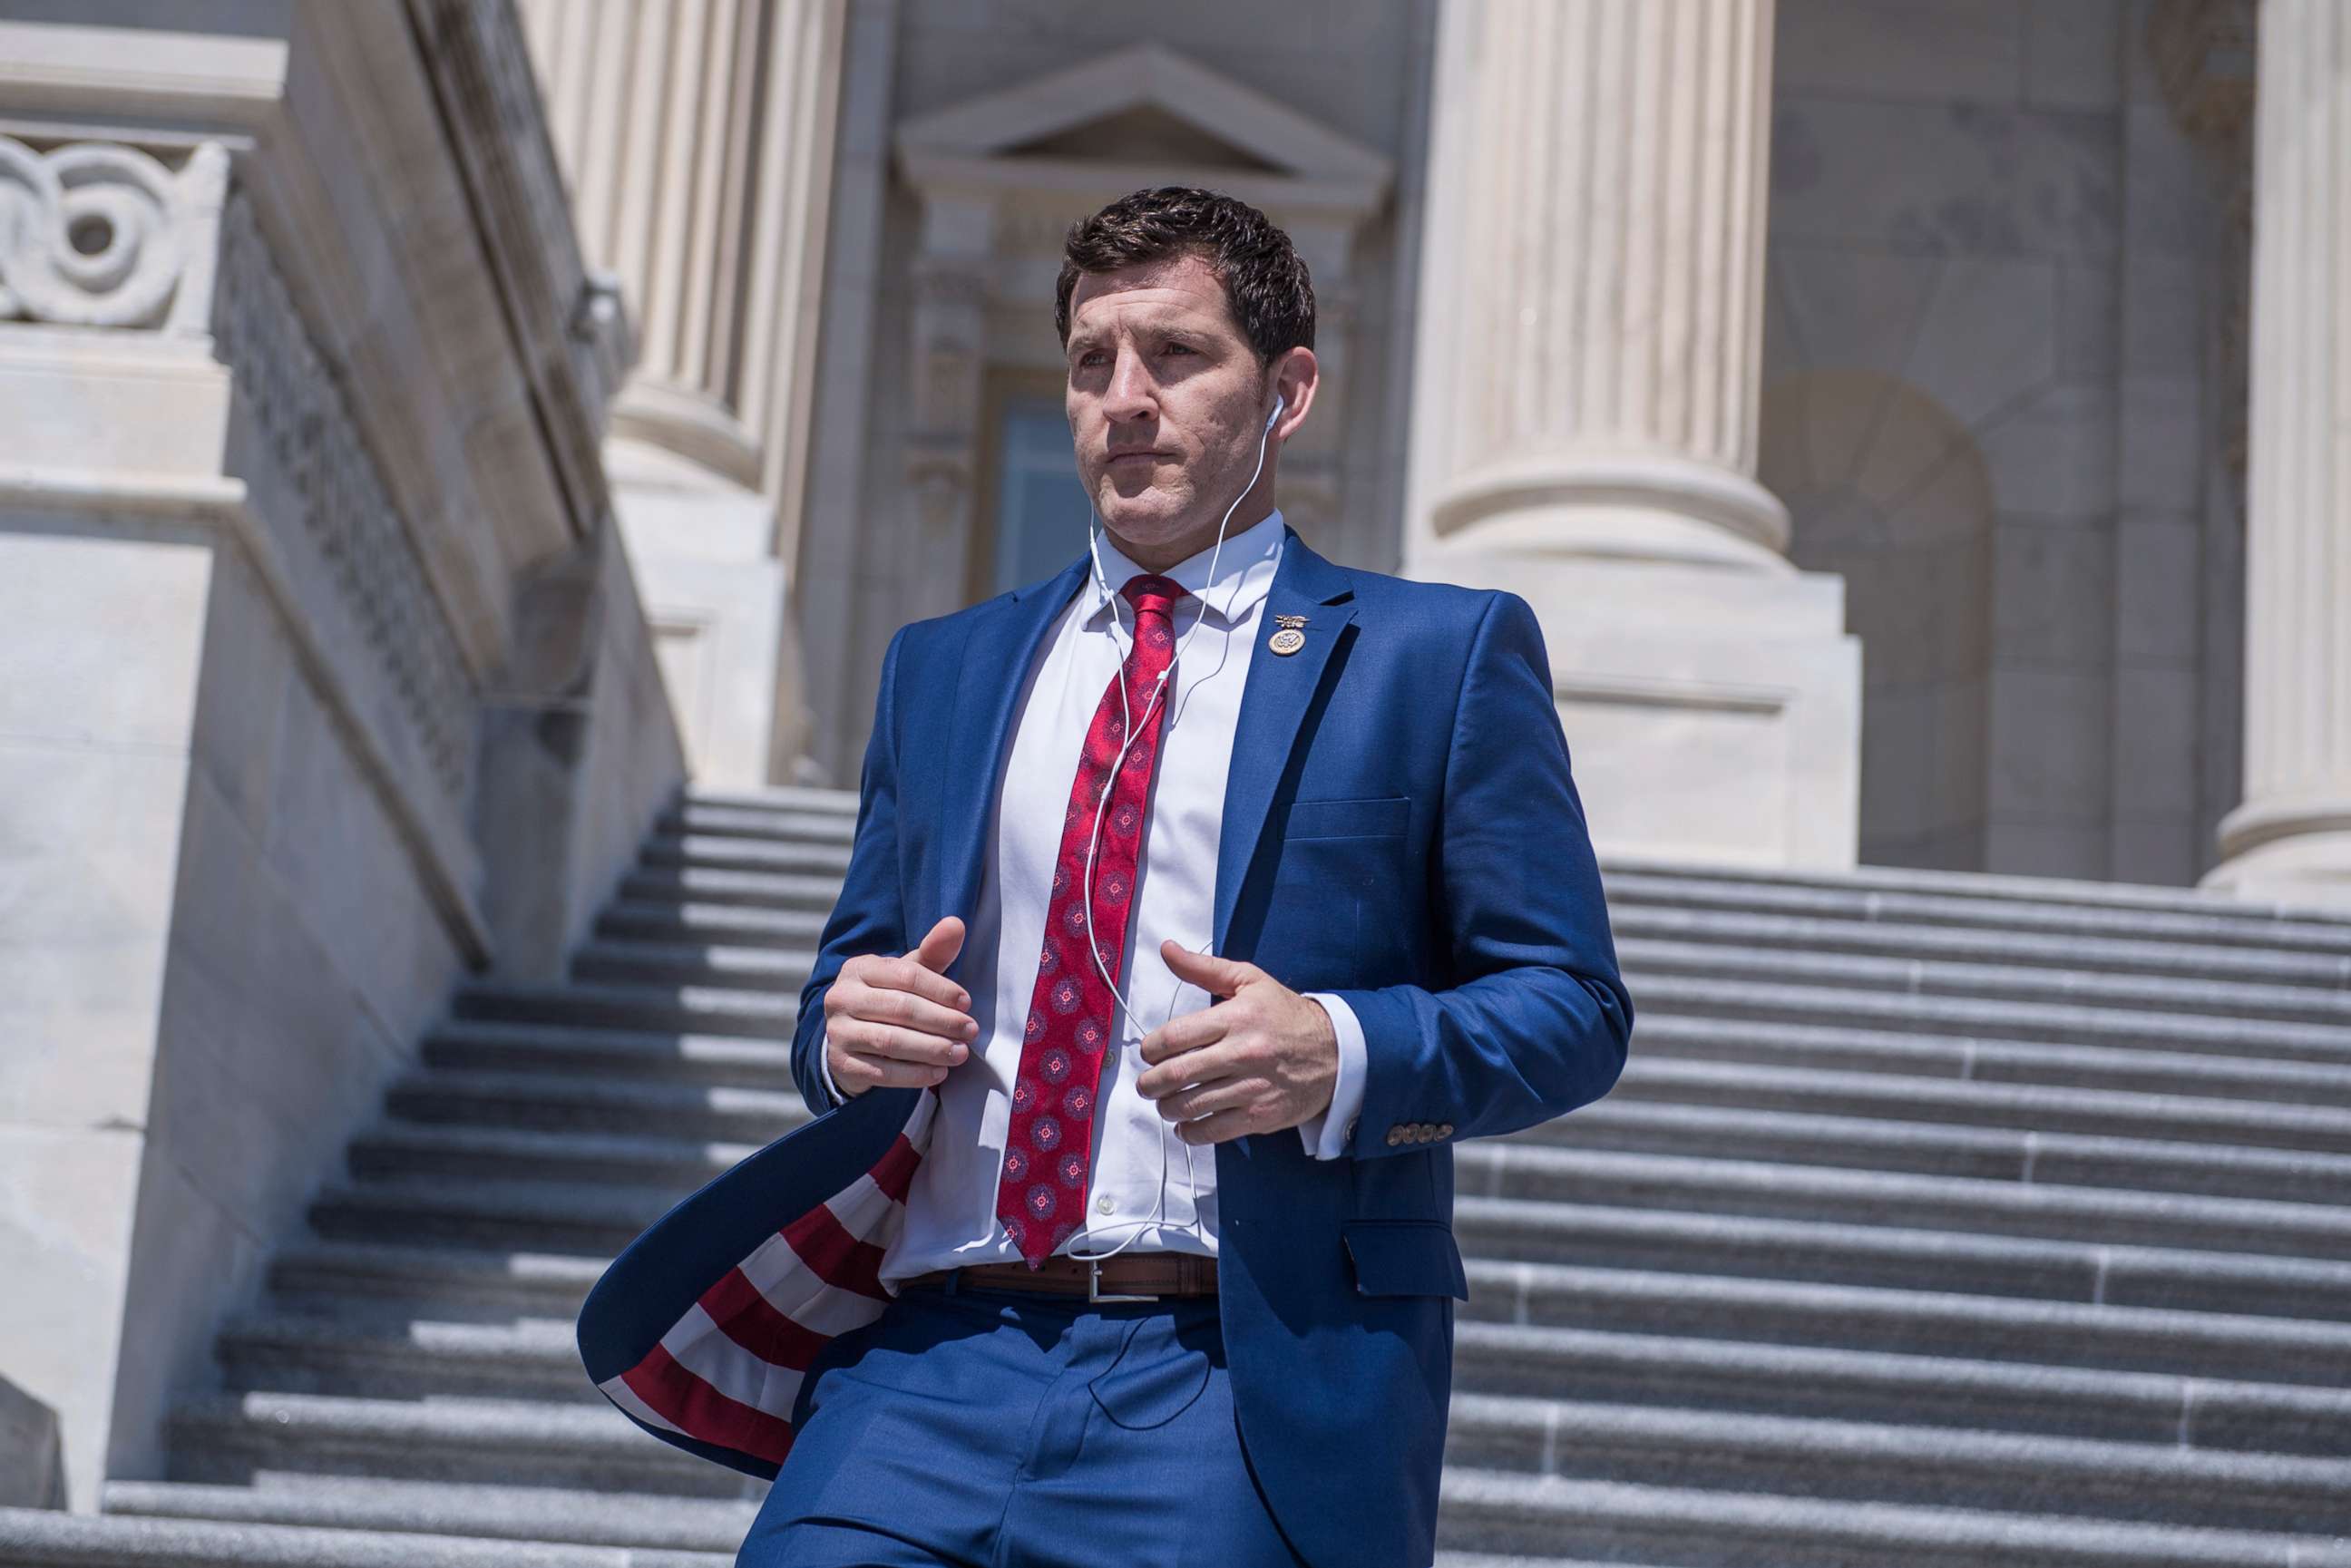 PHOTO: Rep. Scott Taylor leaves the Capitol, May 24, 2018, in Washington, D.C.